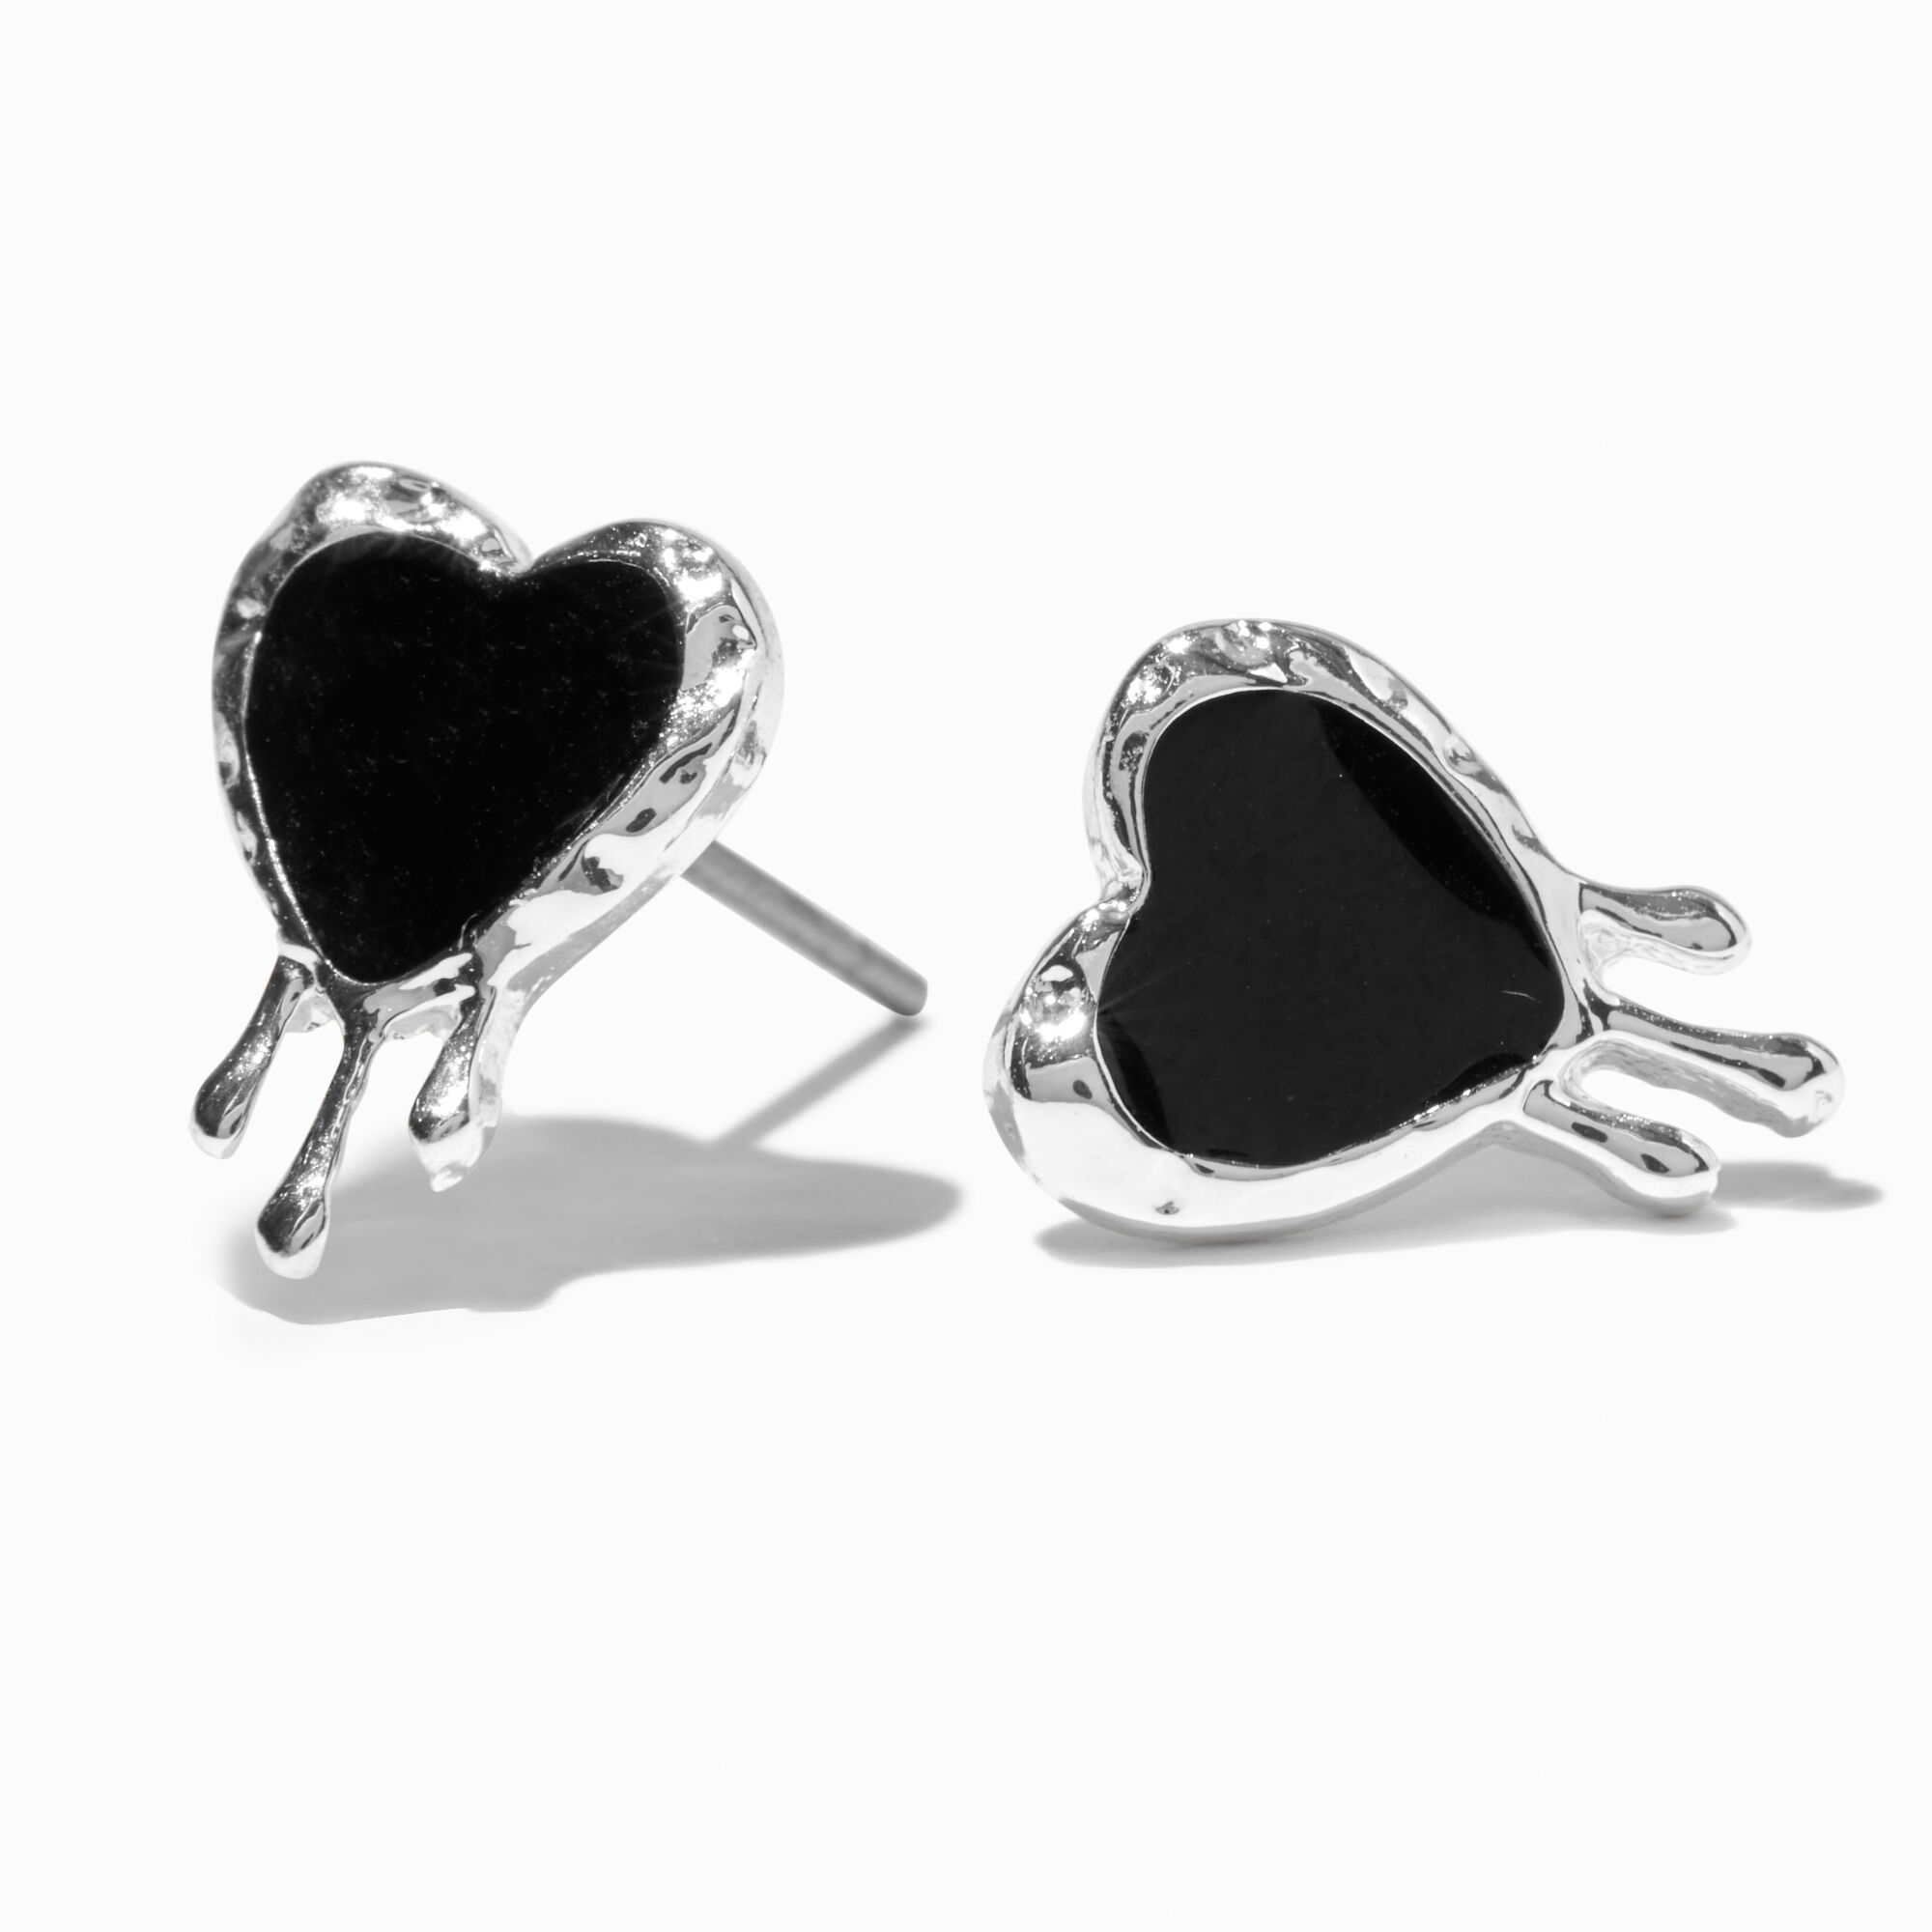 View Claires Drippy Heart Stud Earrings Black information